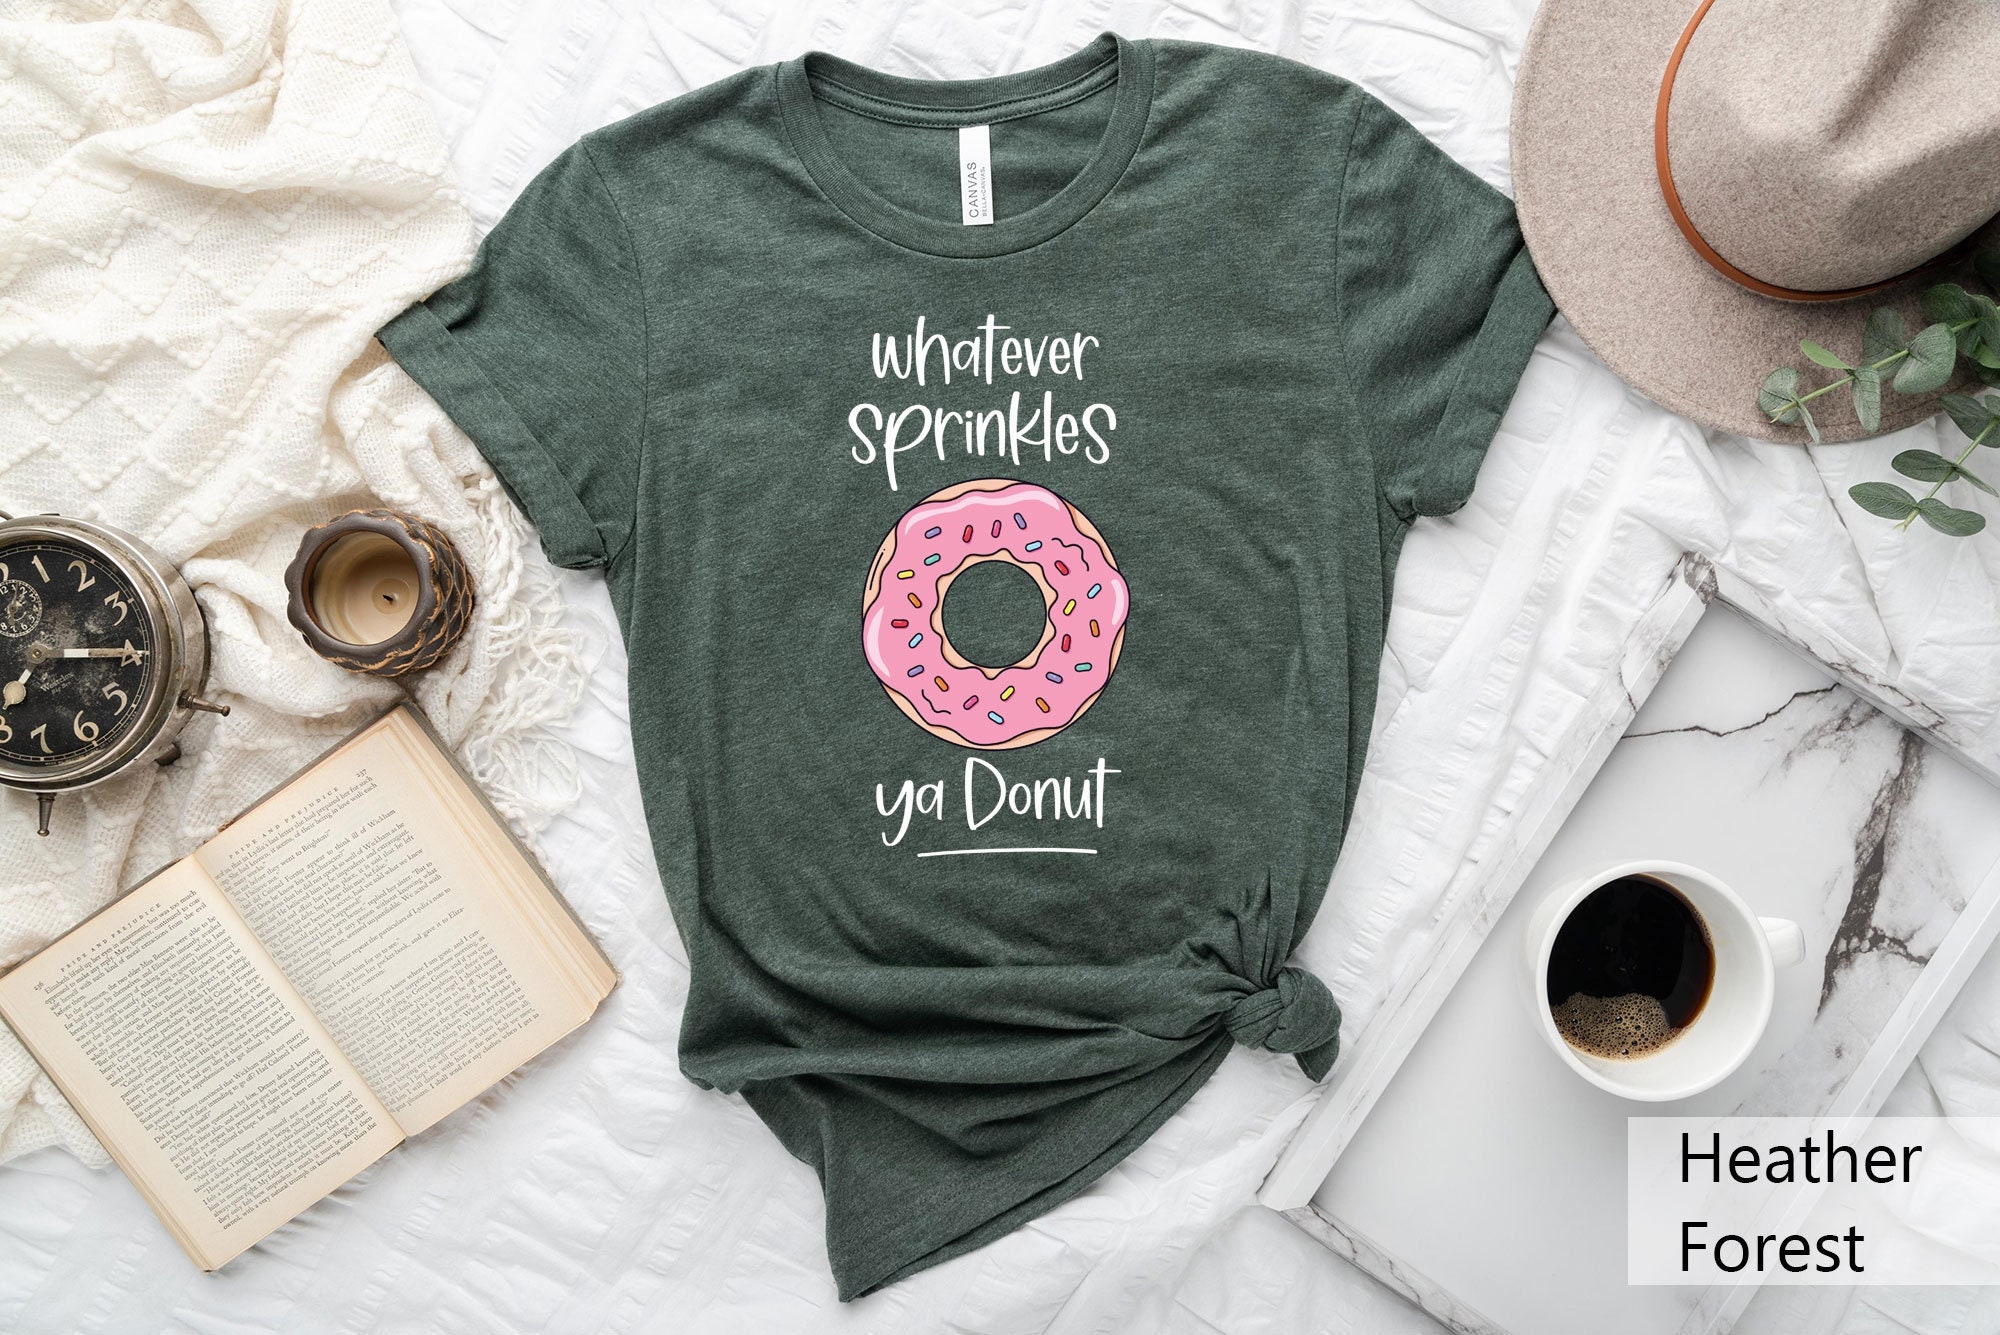 Whatever Sprinkles Your Donuts T-Shirt, Donut Shirt